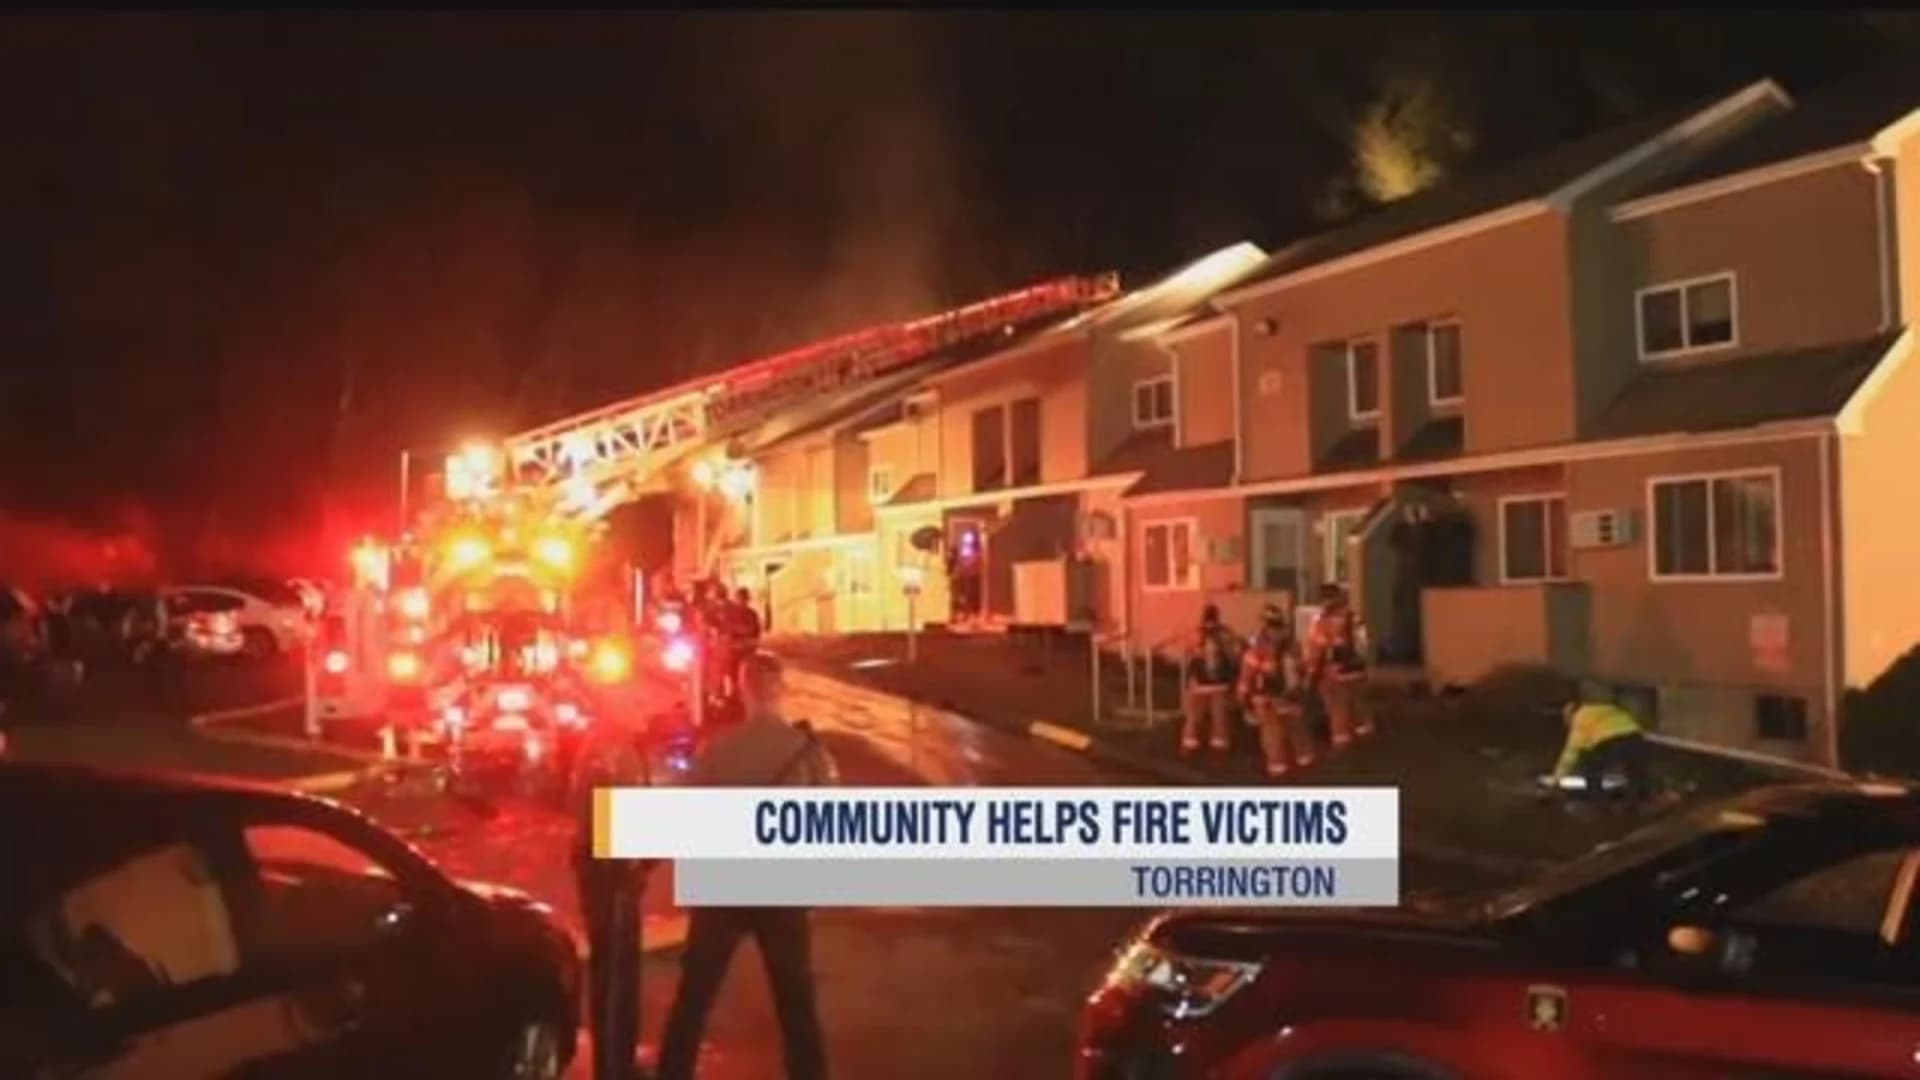 Community members lend support to families displaced by Torrington fire